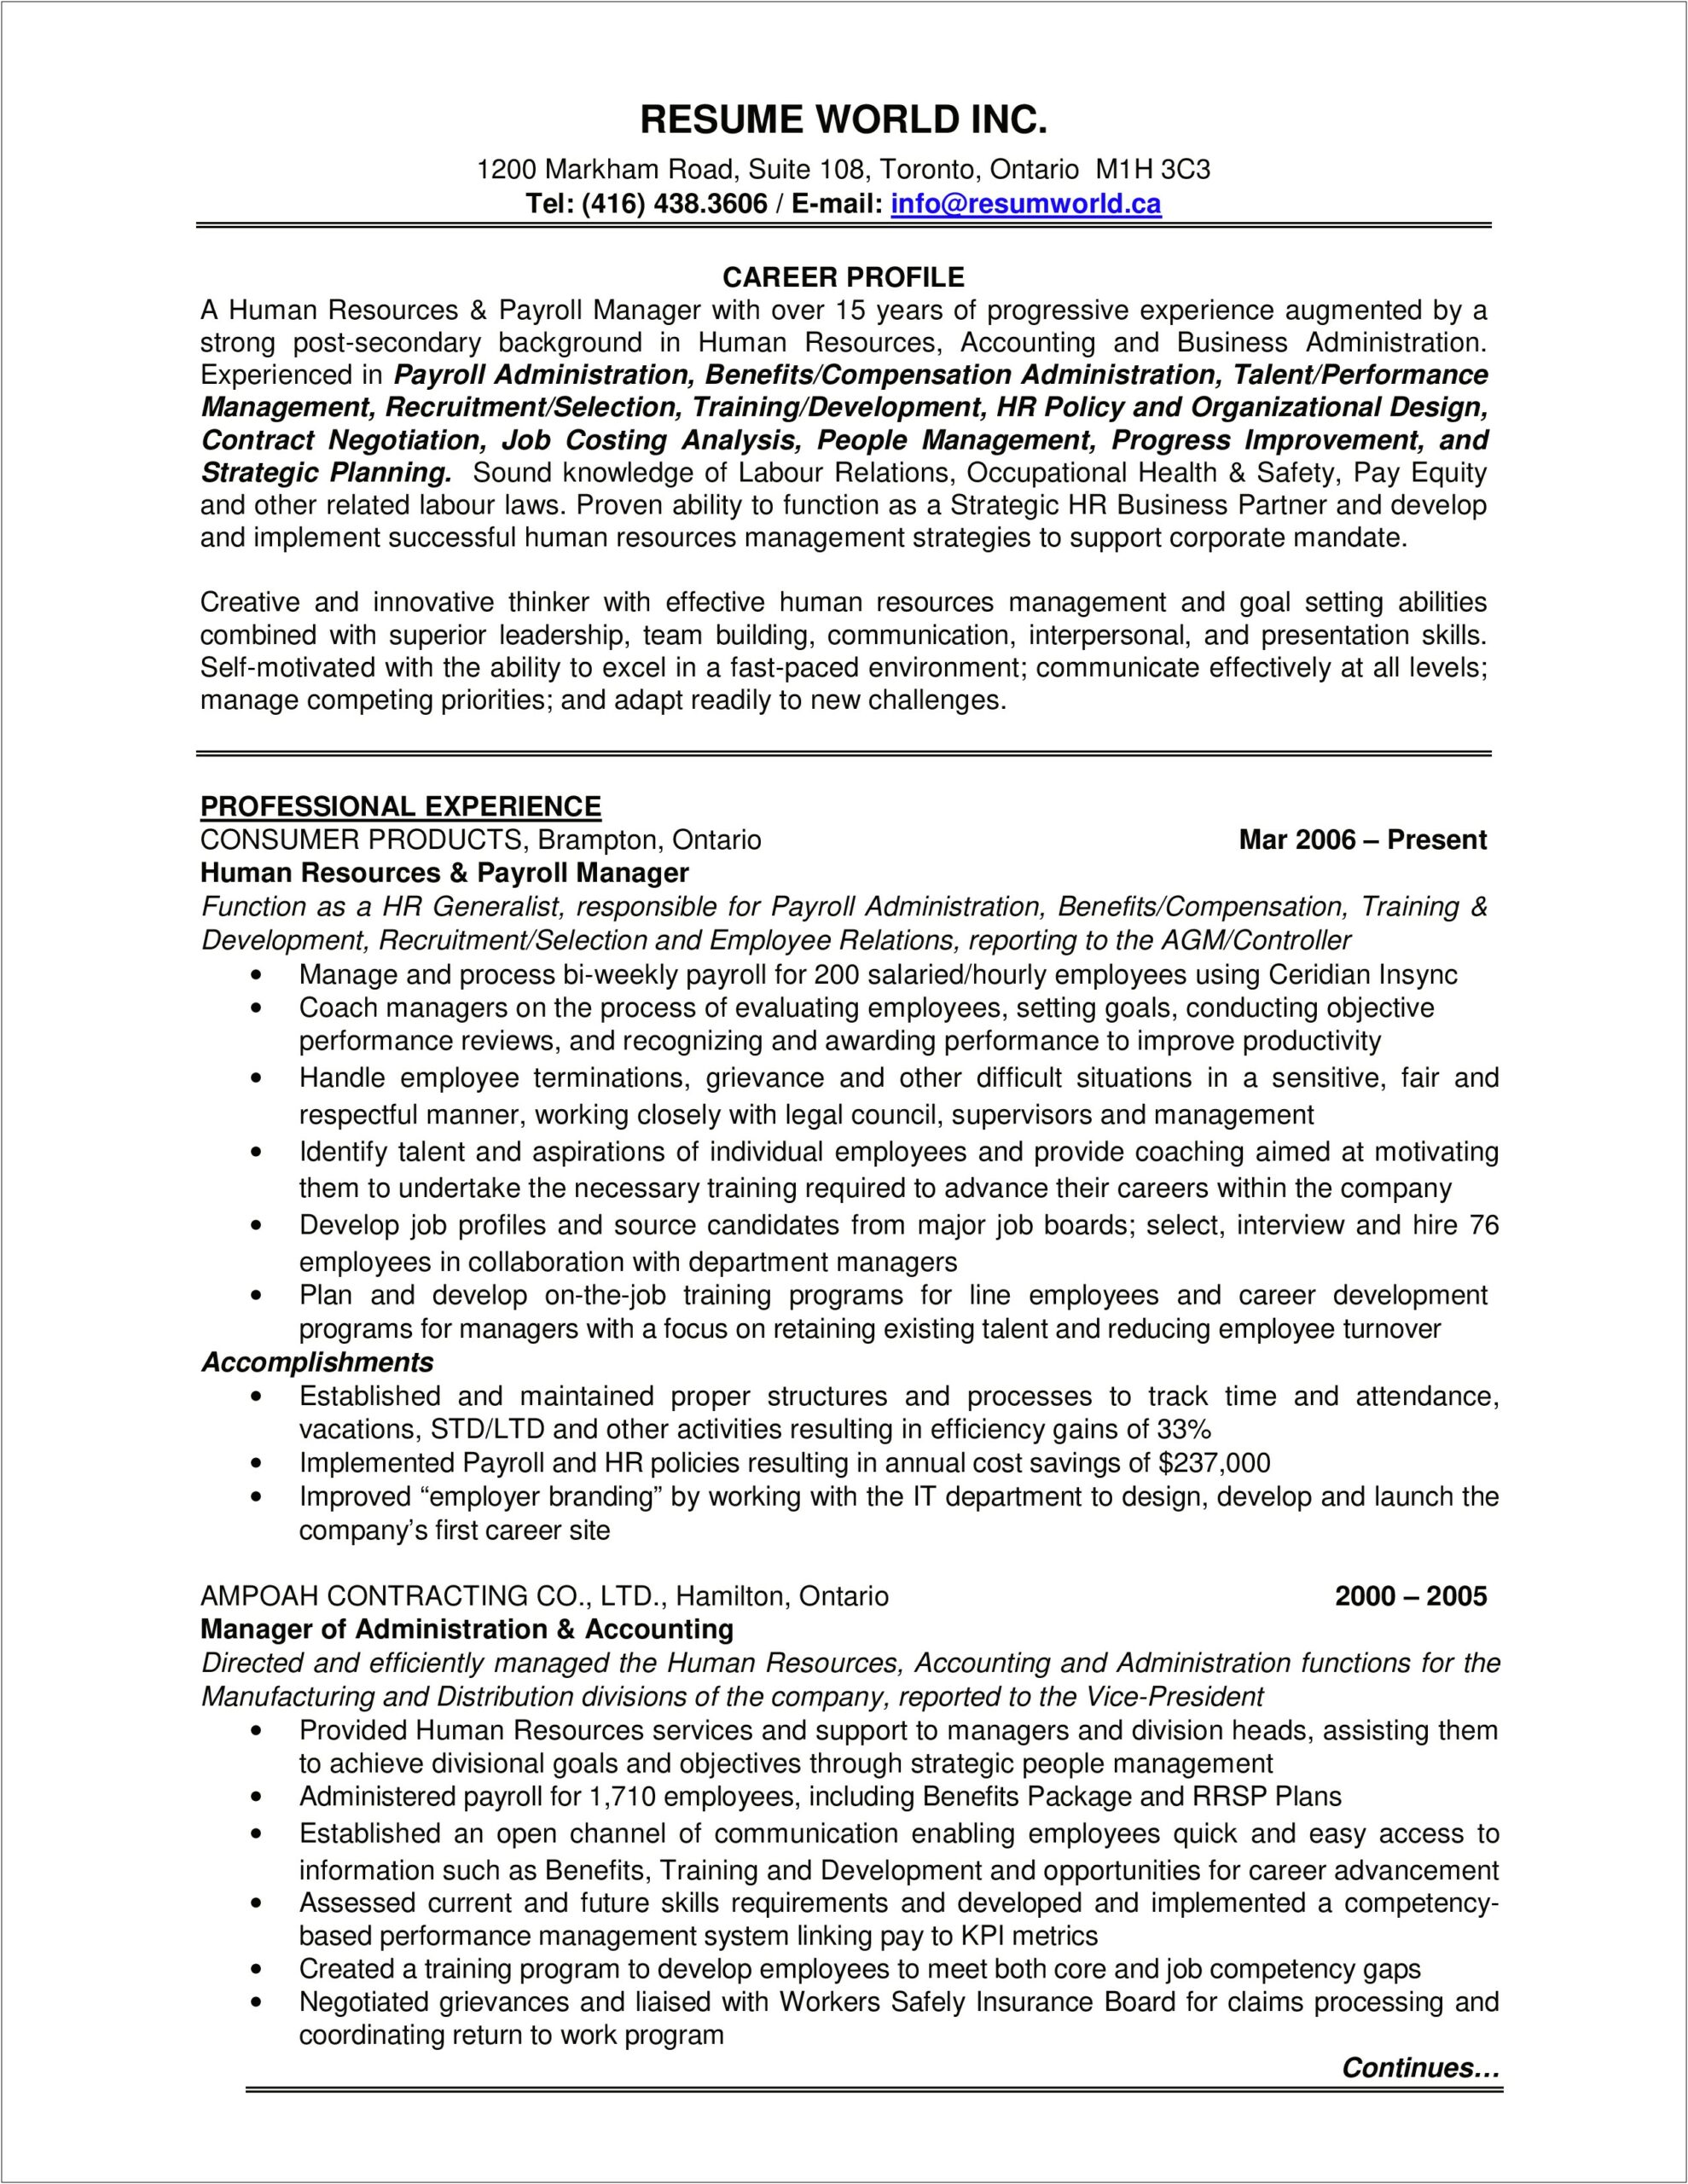 Human Resource Recruiter Resume Without Experience